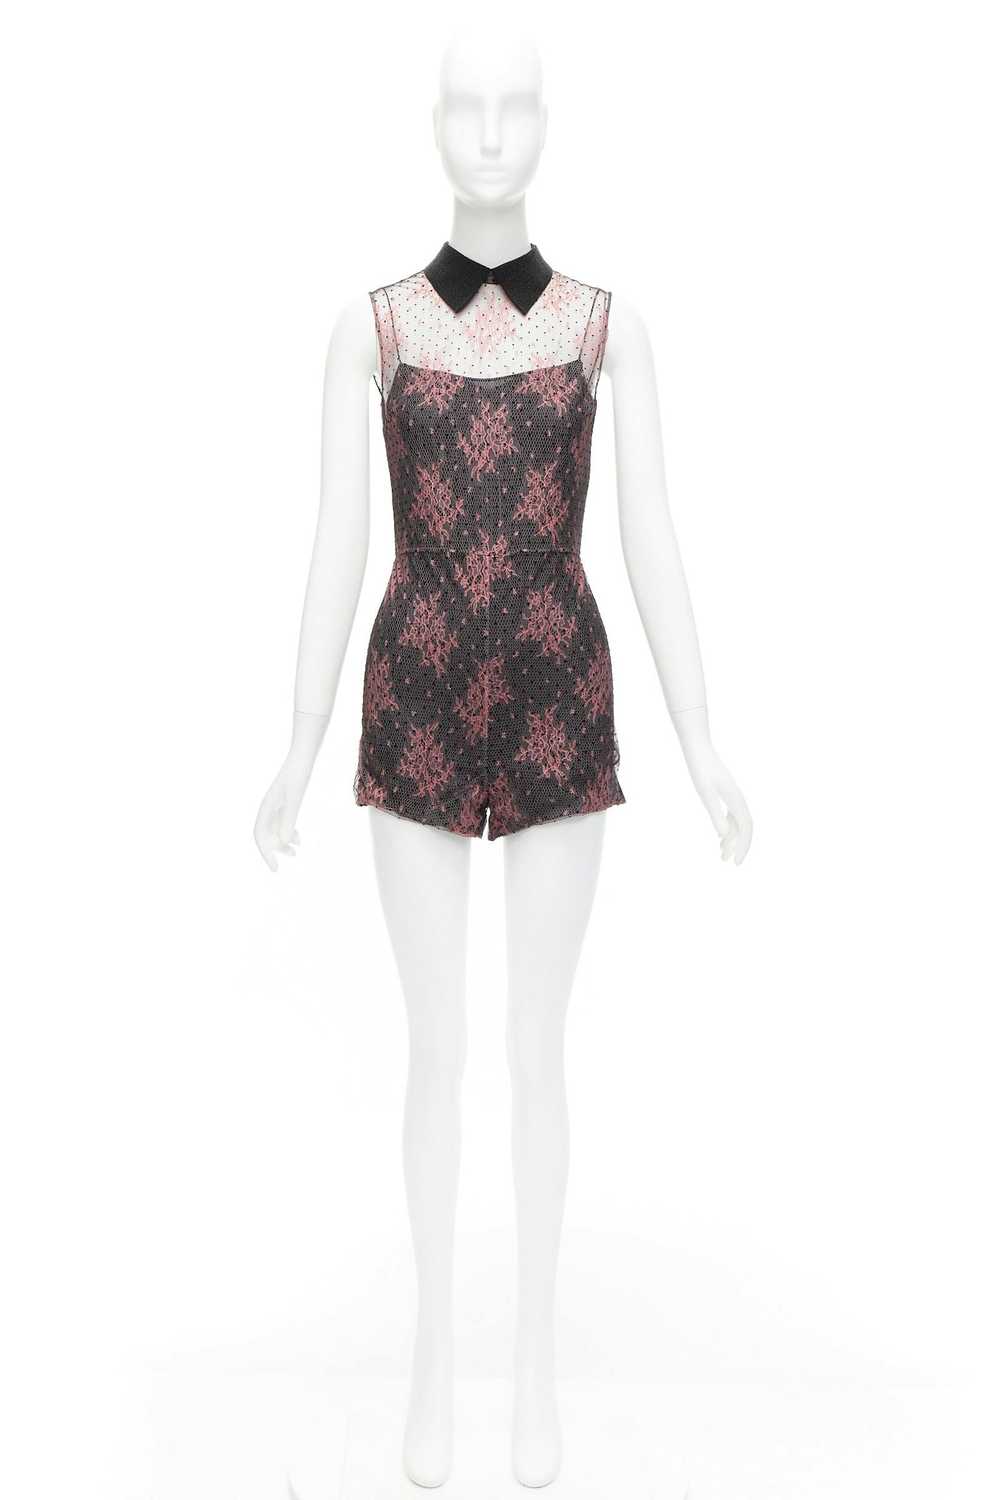 Dior CHRISTIAN DIOR black pink intricate lace ove… - image 9